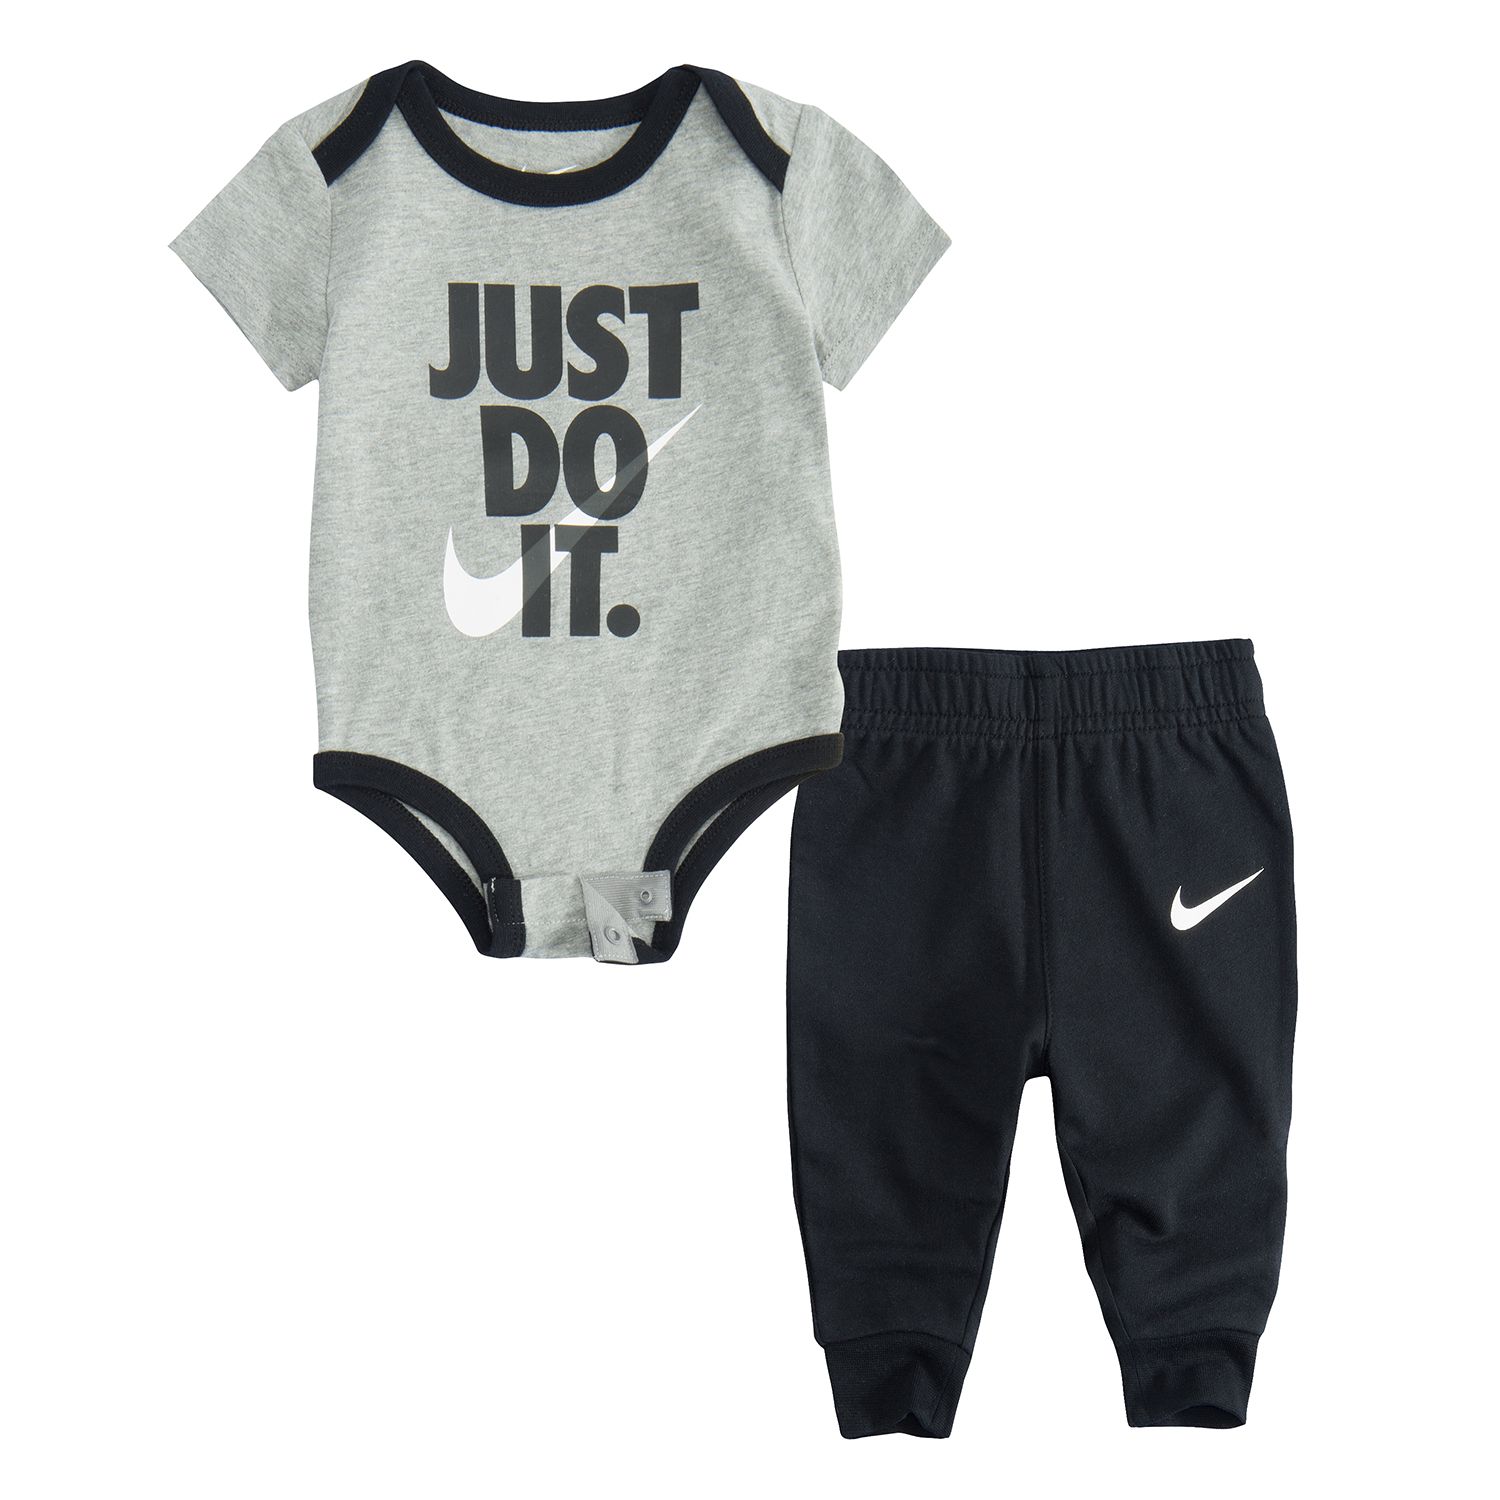 jogger for baby